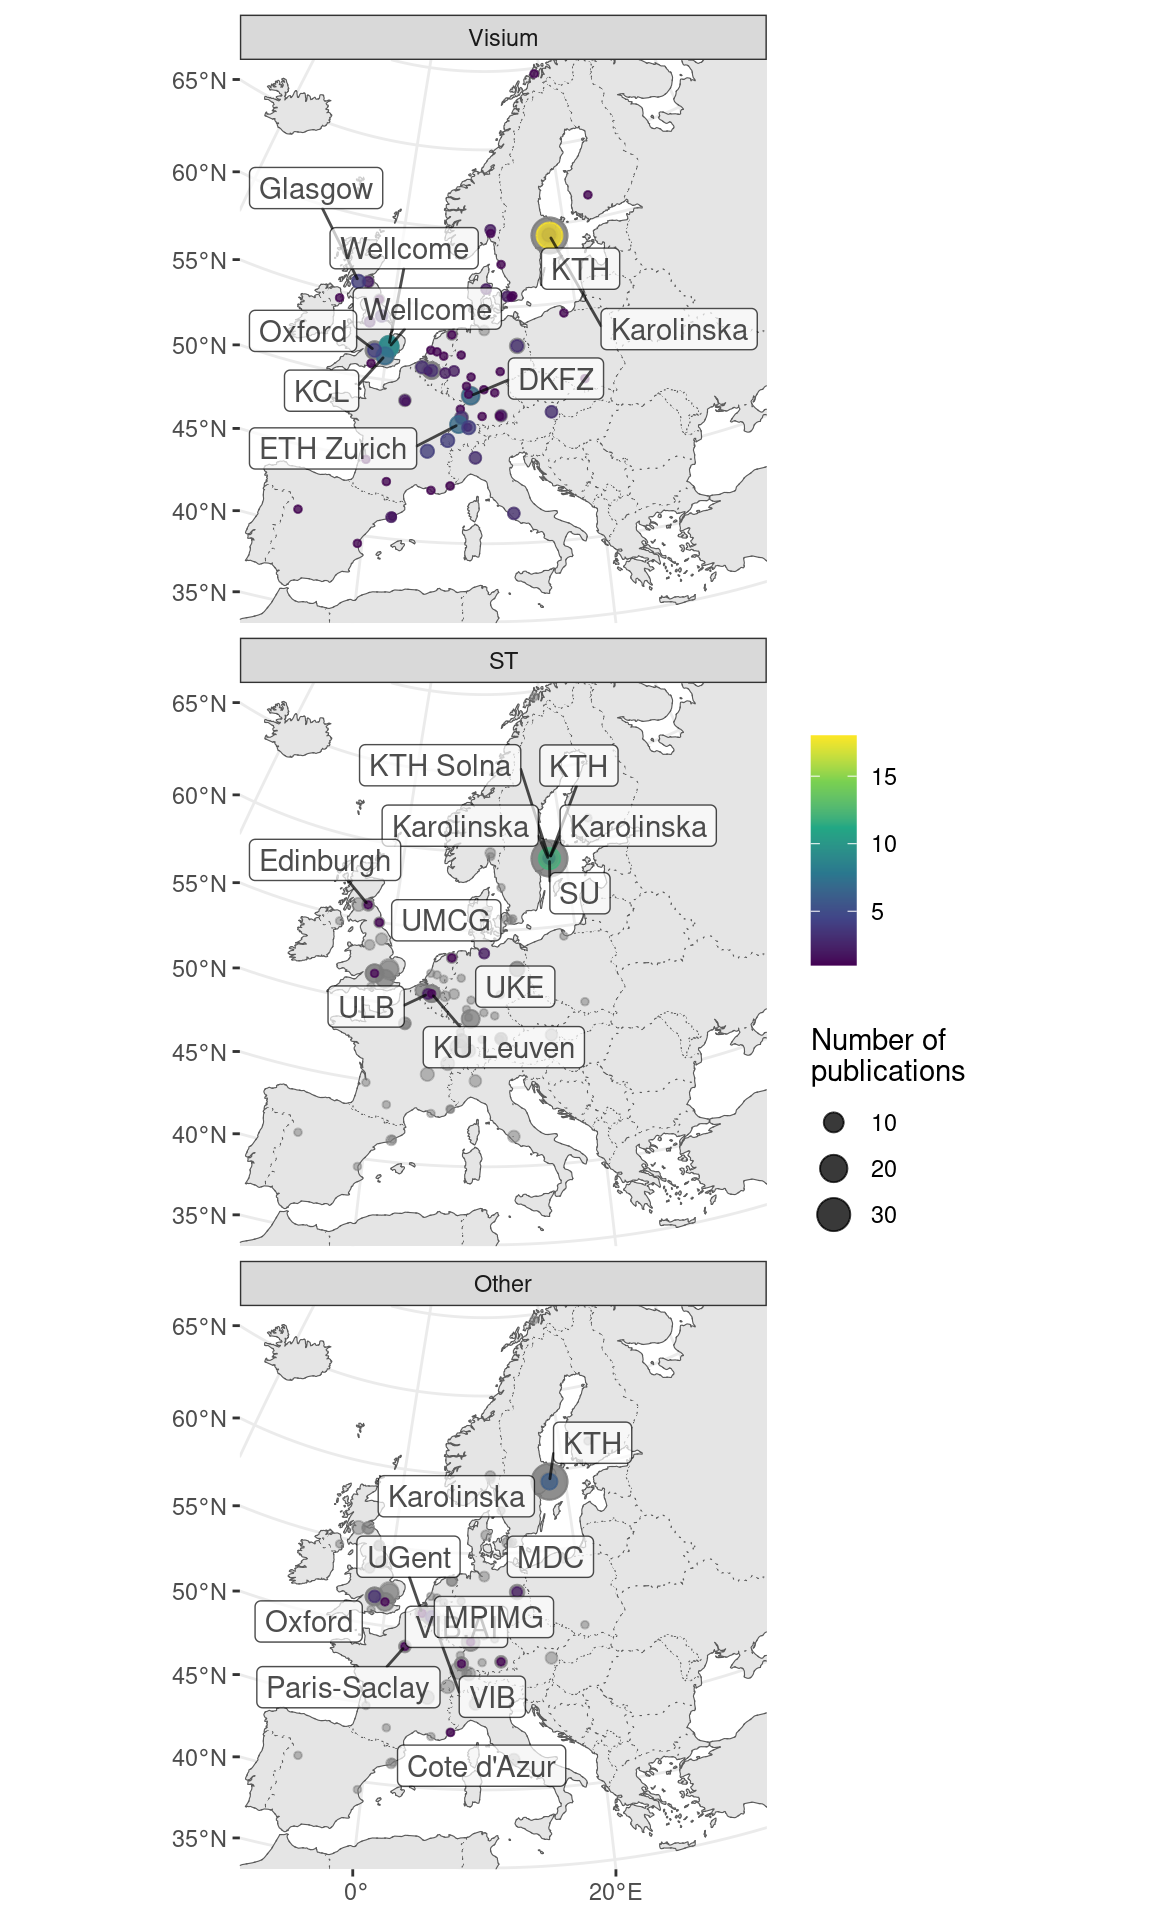 Cities and institutions using ST and Visium in western Europe. Preprints are included.